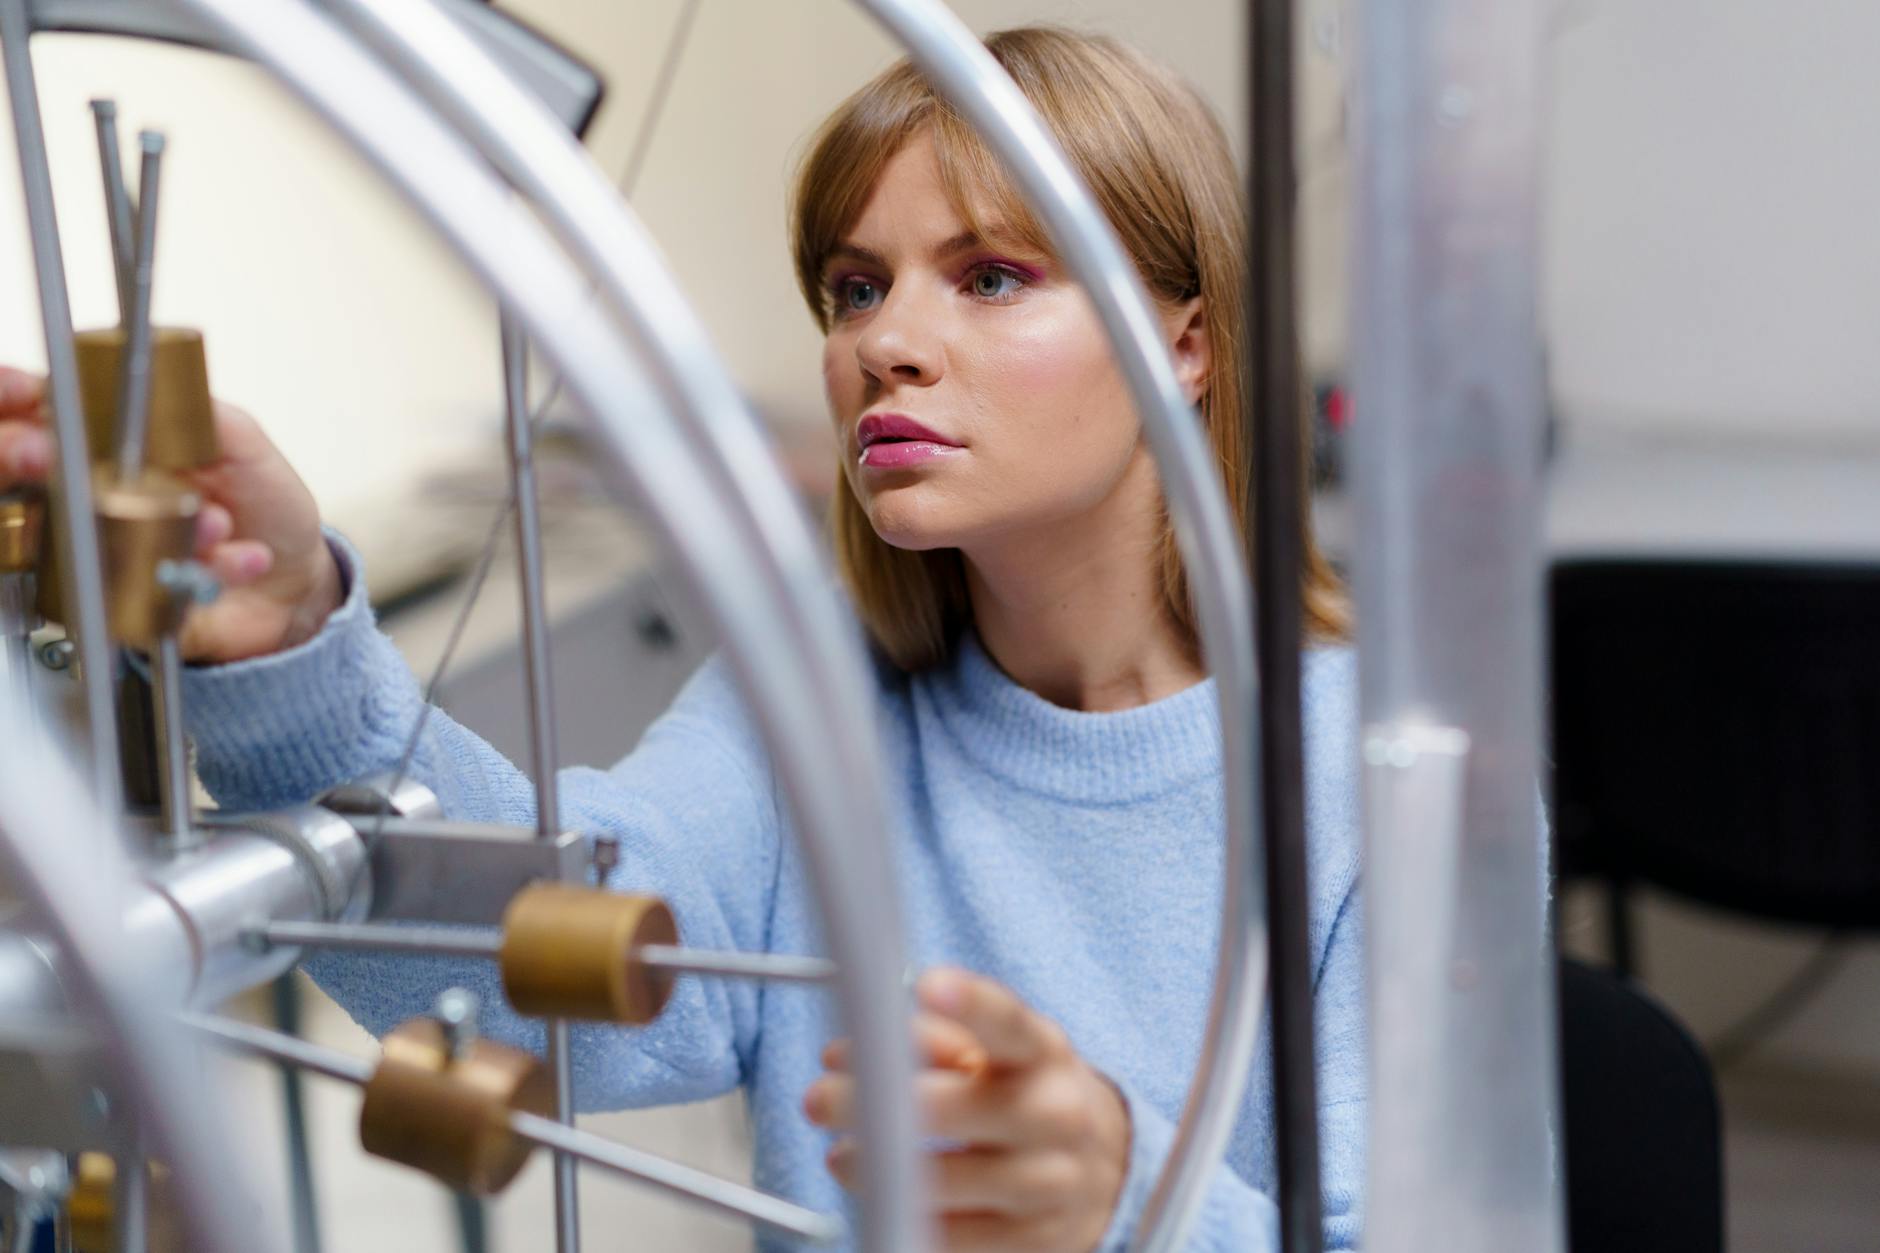 woman in blue sweater studying a metal object